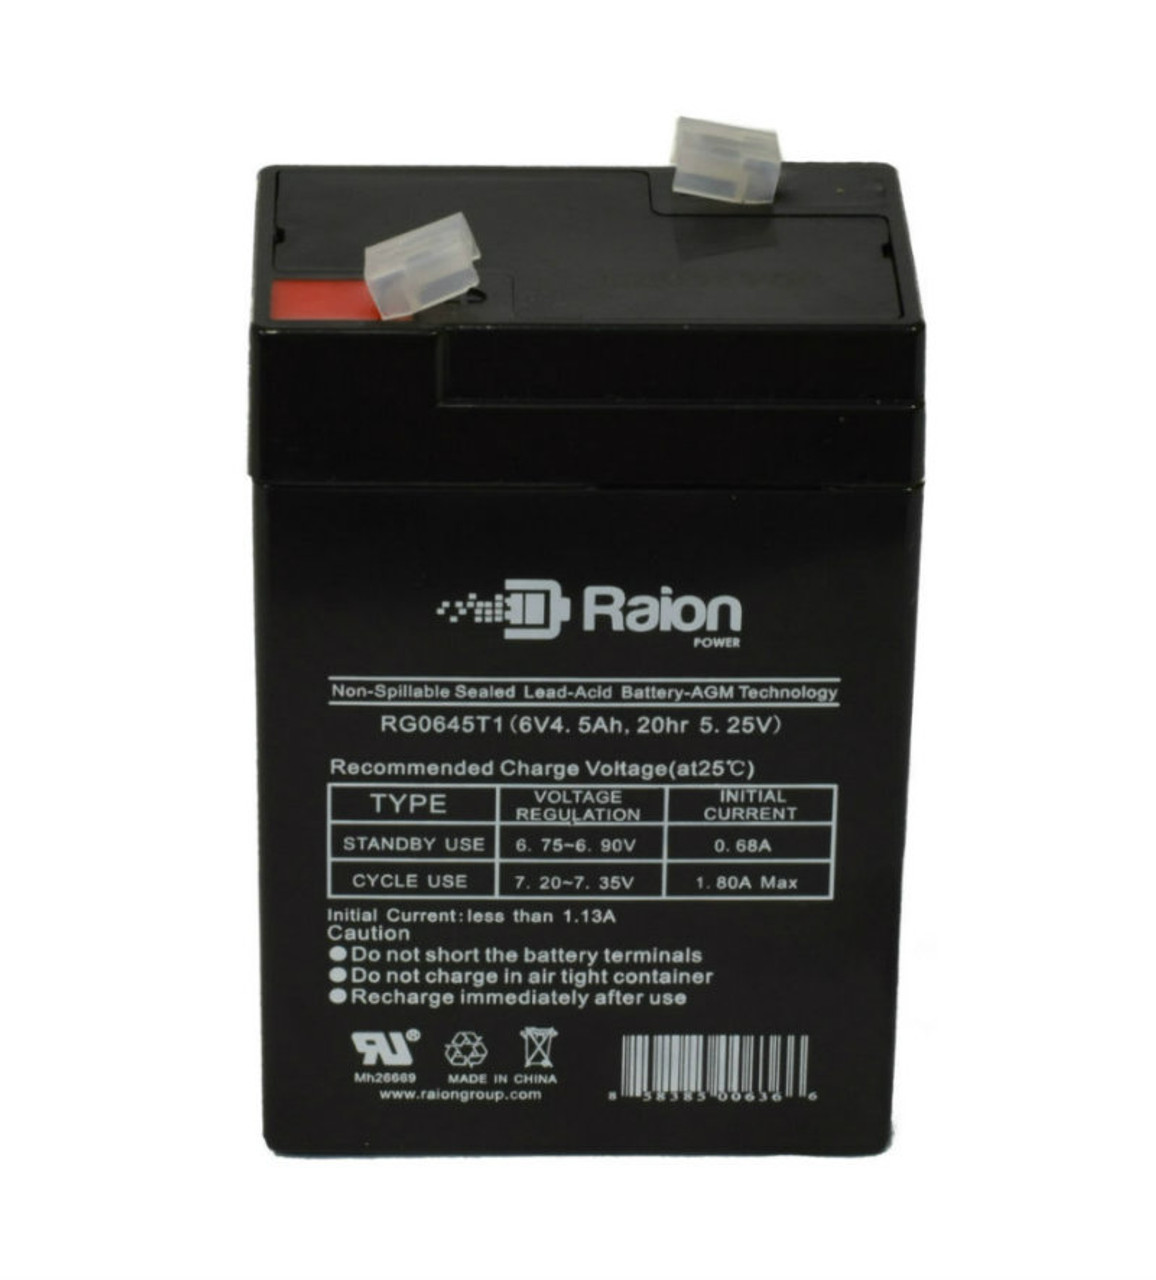 Raion Power RG0645T1 Replacement Battery Cartridge for Criticare Systems Pulse Oximeter End/TLCO2